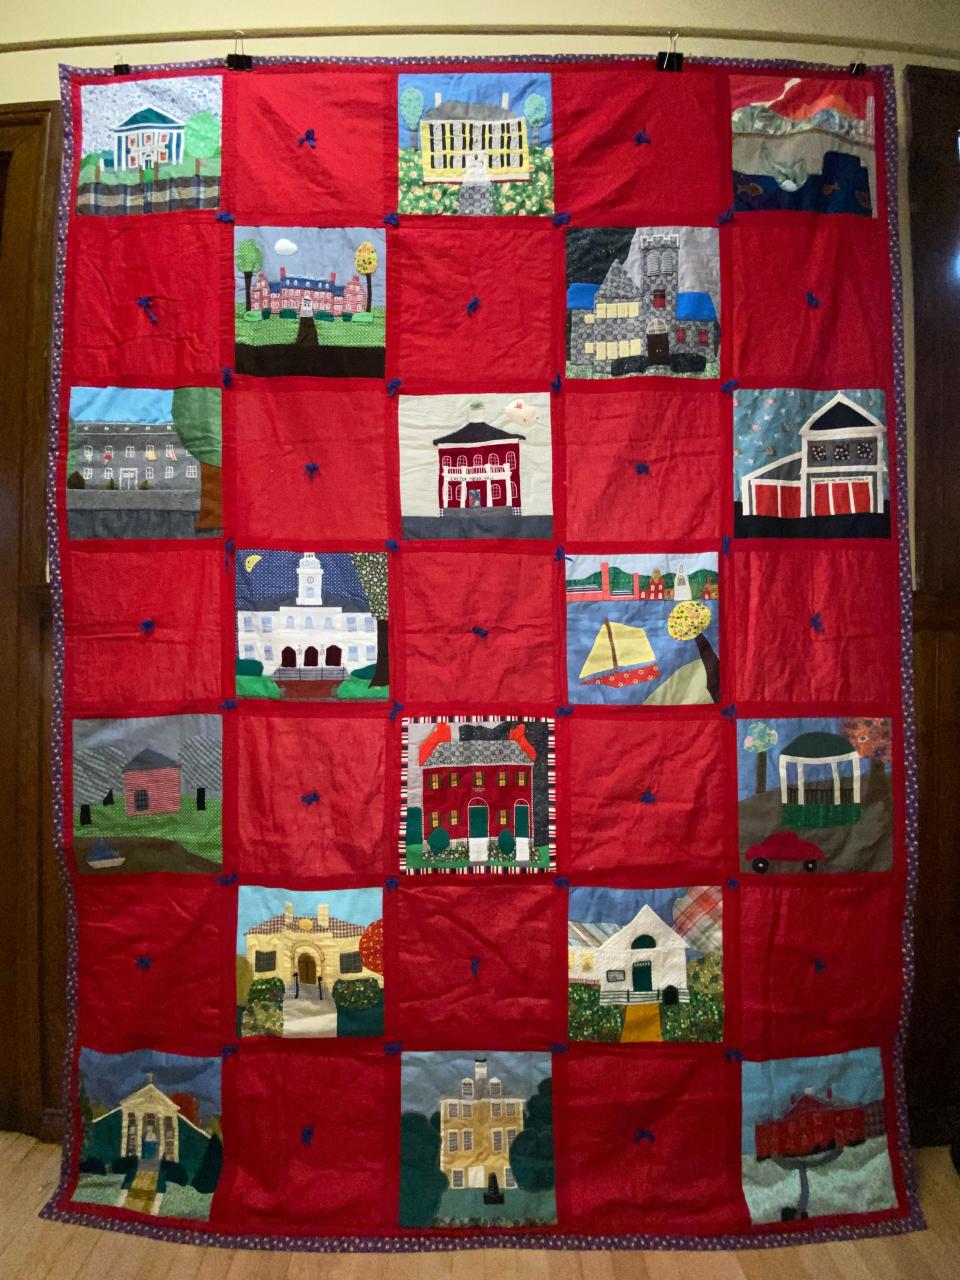 Exeter Town Quilt – created in 1975 as part of the bicentennial celebrations. It will be on display, along with other quilts, during the months of May and June at the Exeter Historical Society.